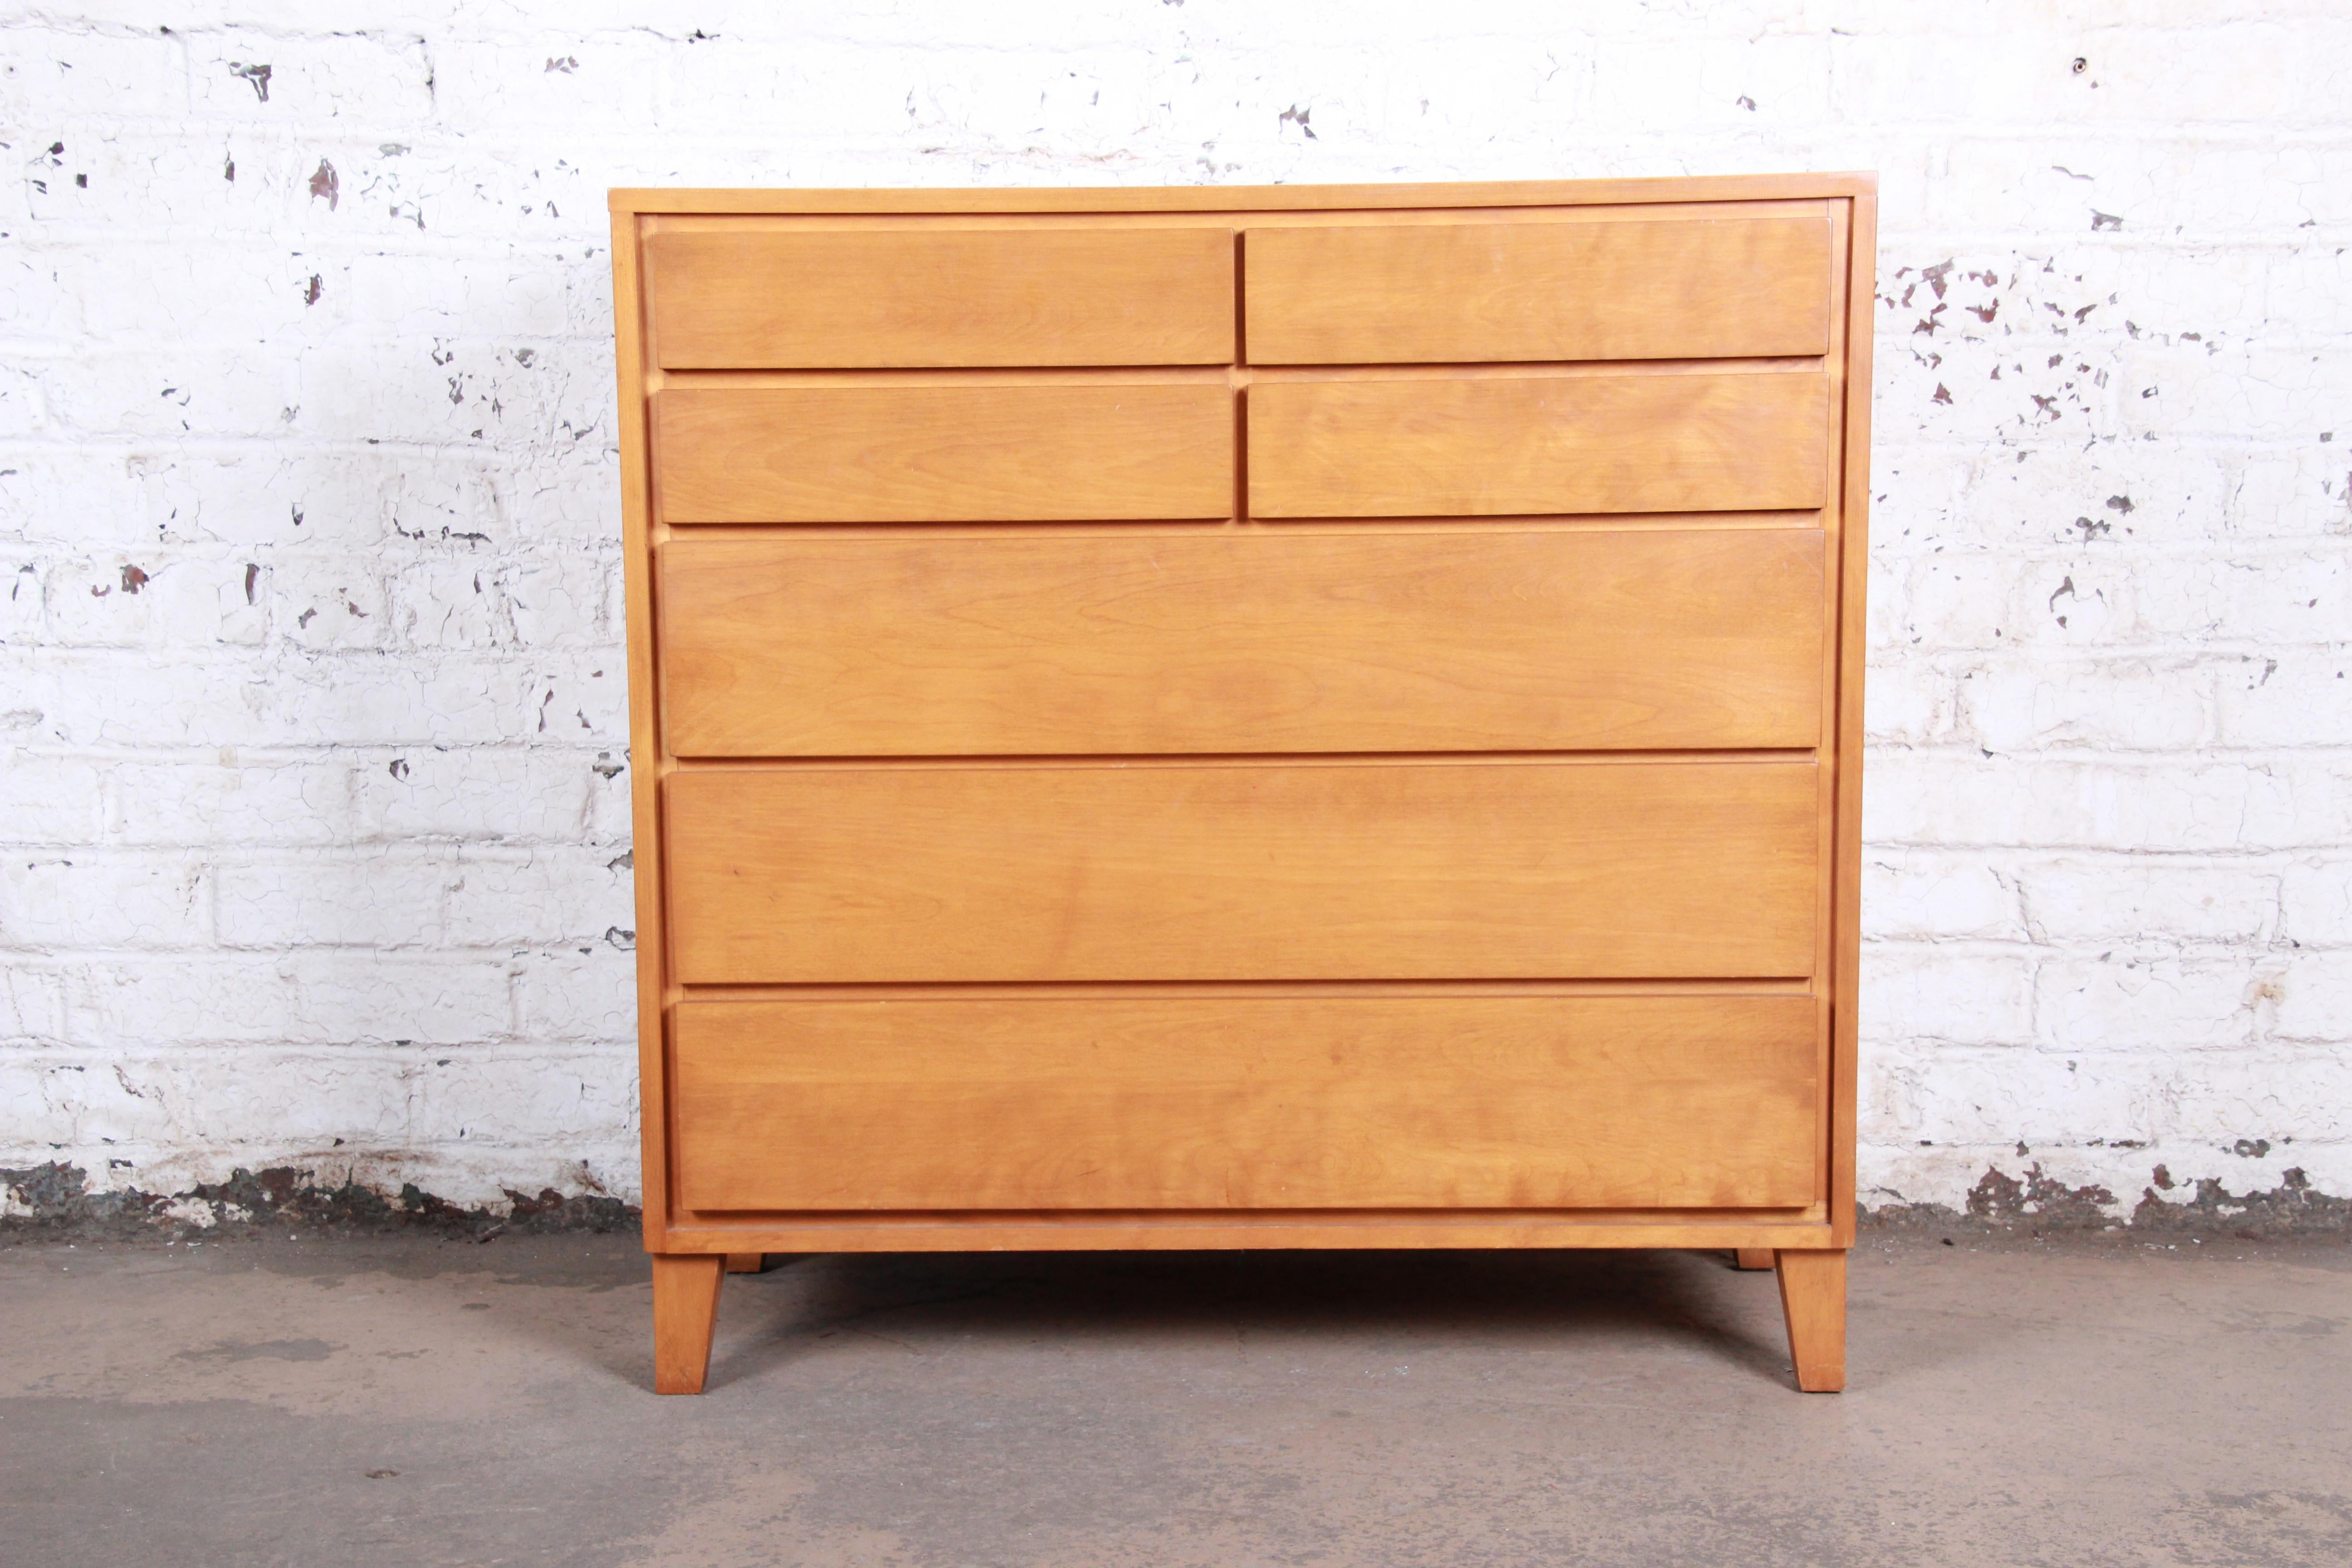 A gorgeous American Modern highboy dresser designed by Russel Wright for Conant Ball, circa 1950. The dresser features solid maple construction with beautiful wood grain and sleek, minimalist mid-century design. It offers ample storage, with seven